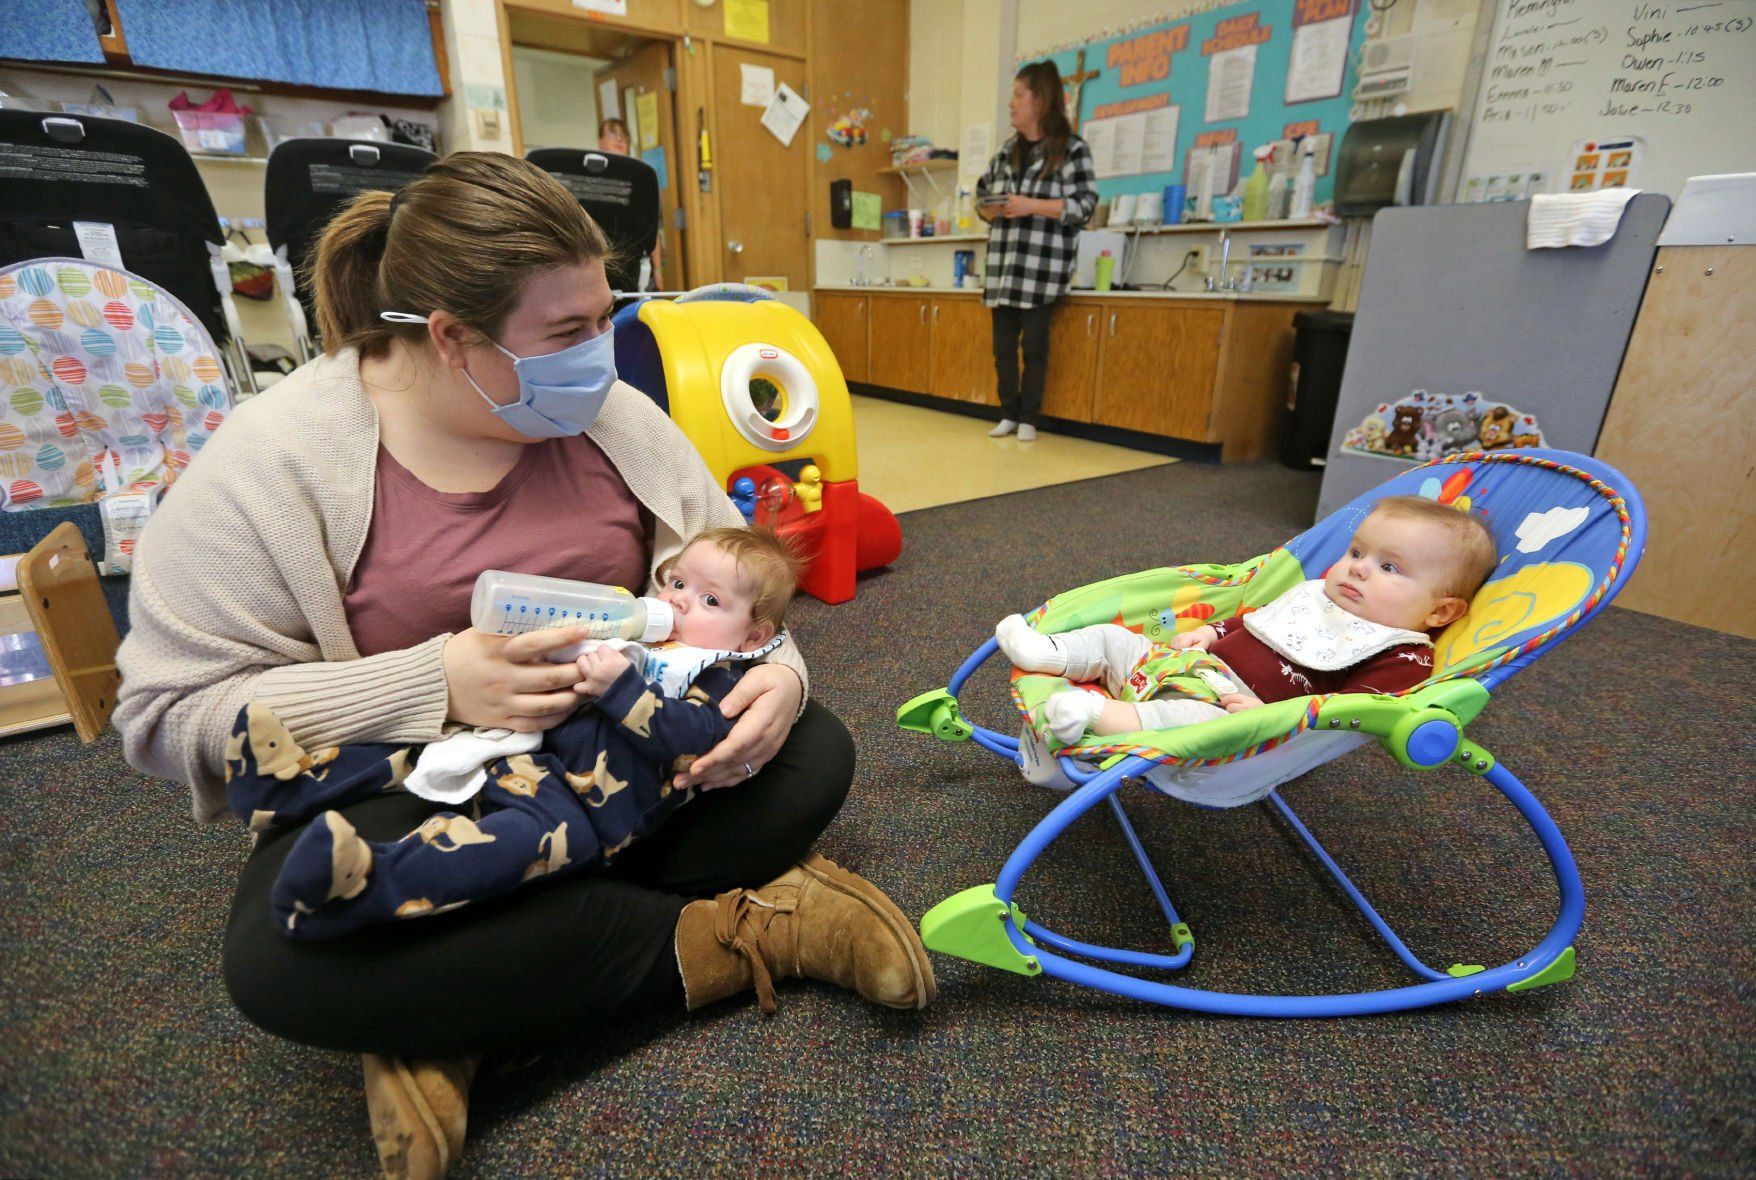 Holly Peterson, a child care associate at Holy Ghost Early Childhood Center, feeds Owen Sears, 4 months, while Mason Pudlo, 5 months, watches on Thursday at the center in Dubuque.    PHOTO CREDIT: JESSICA REILLY